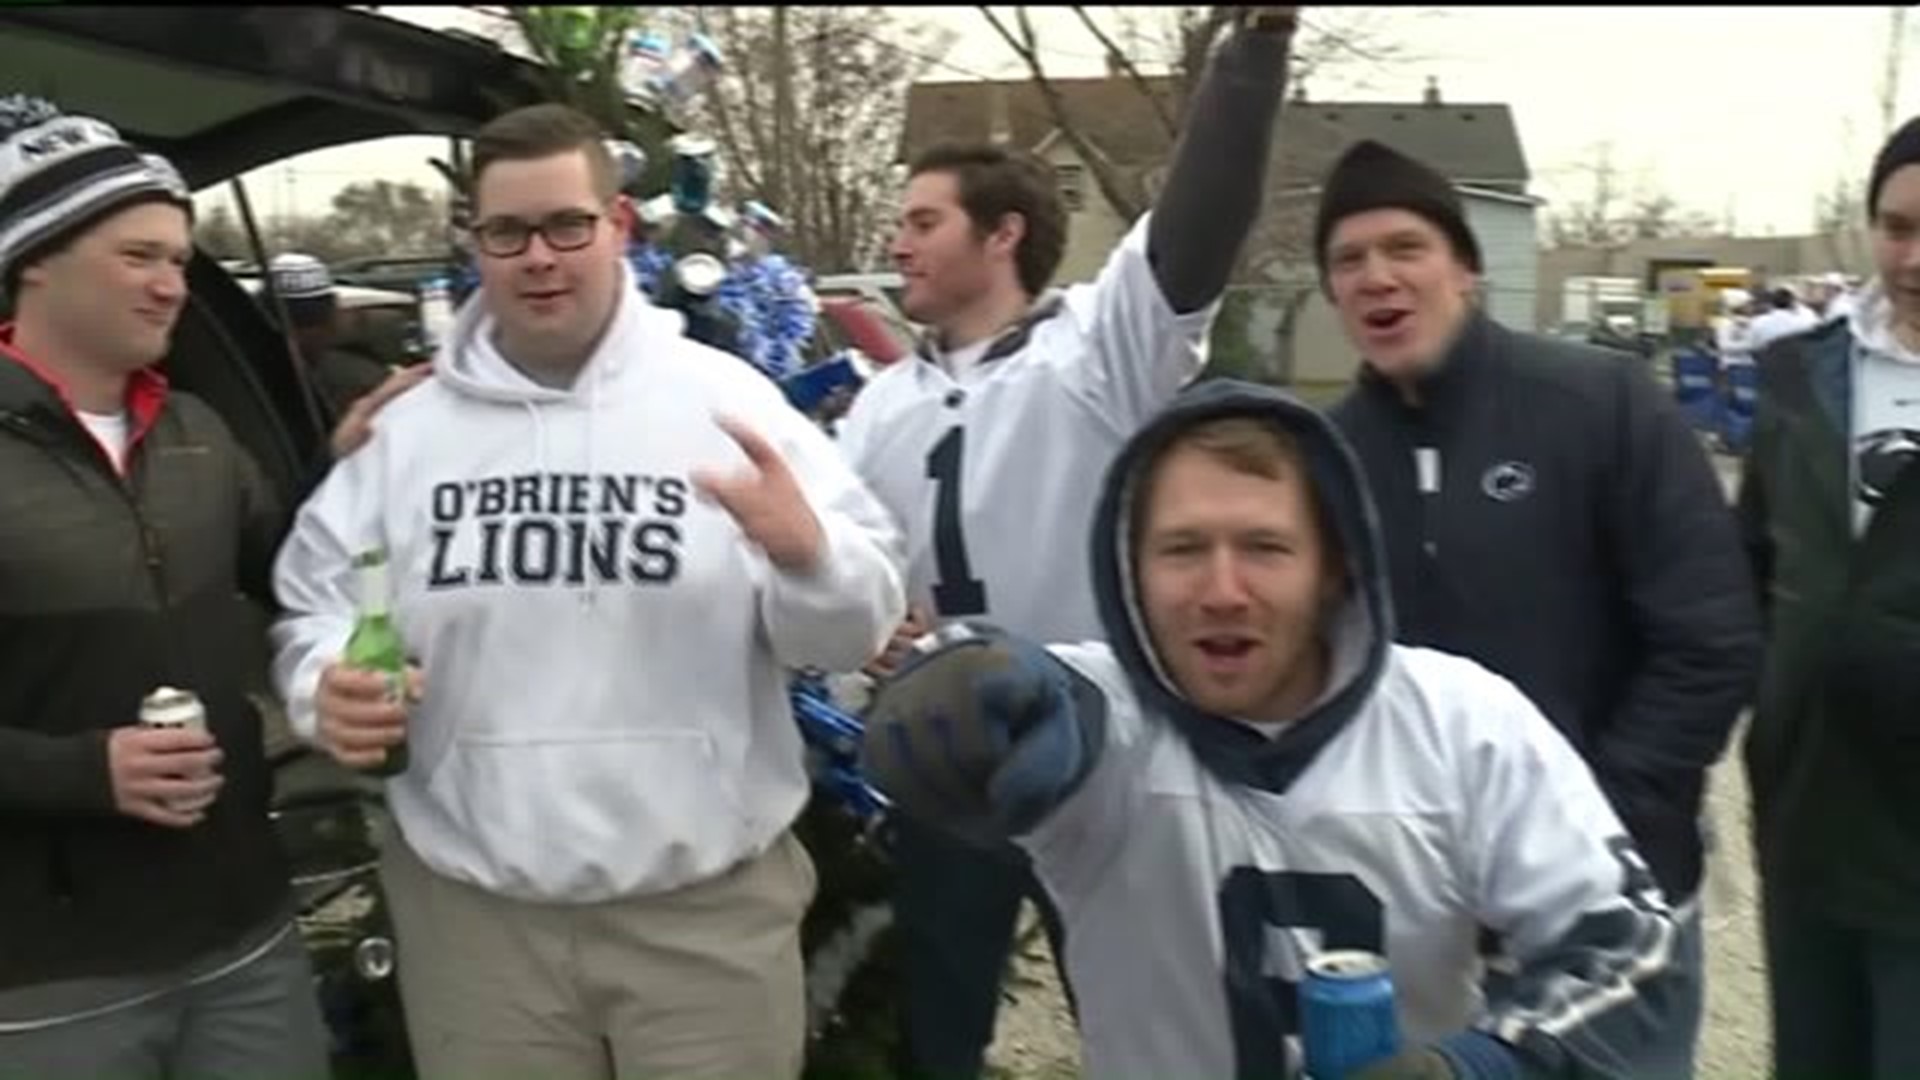 NEPA Fans Excited for B1G Title Game in Indy